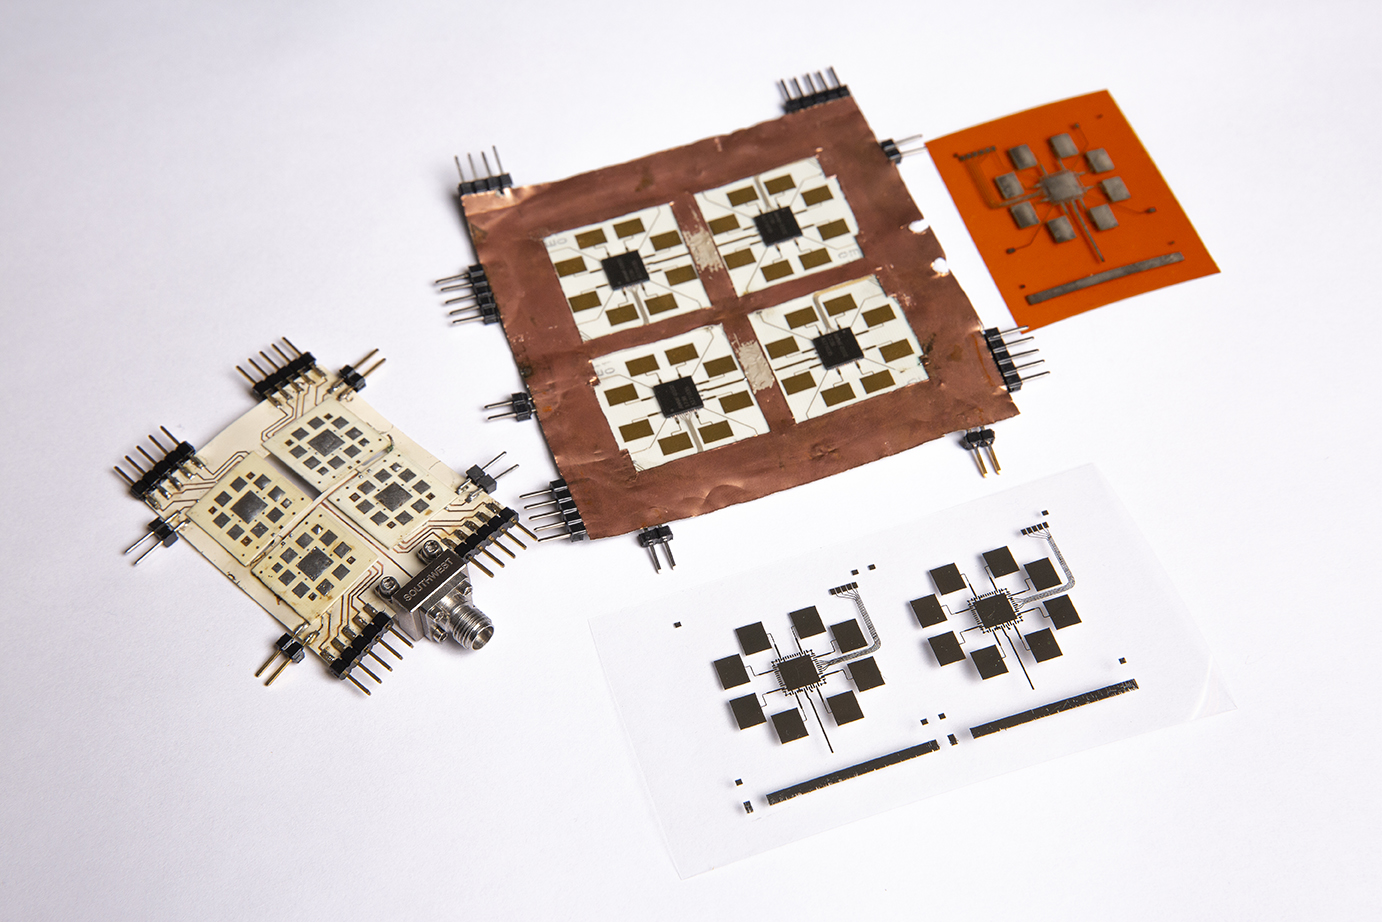 Two fabricated proof-of-concept tile are shown alongside two inkjet-printed tile arrays, which the team will present on at the upcoming International Microwave Symposium in June.